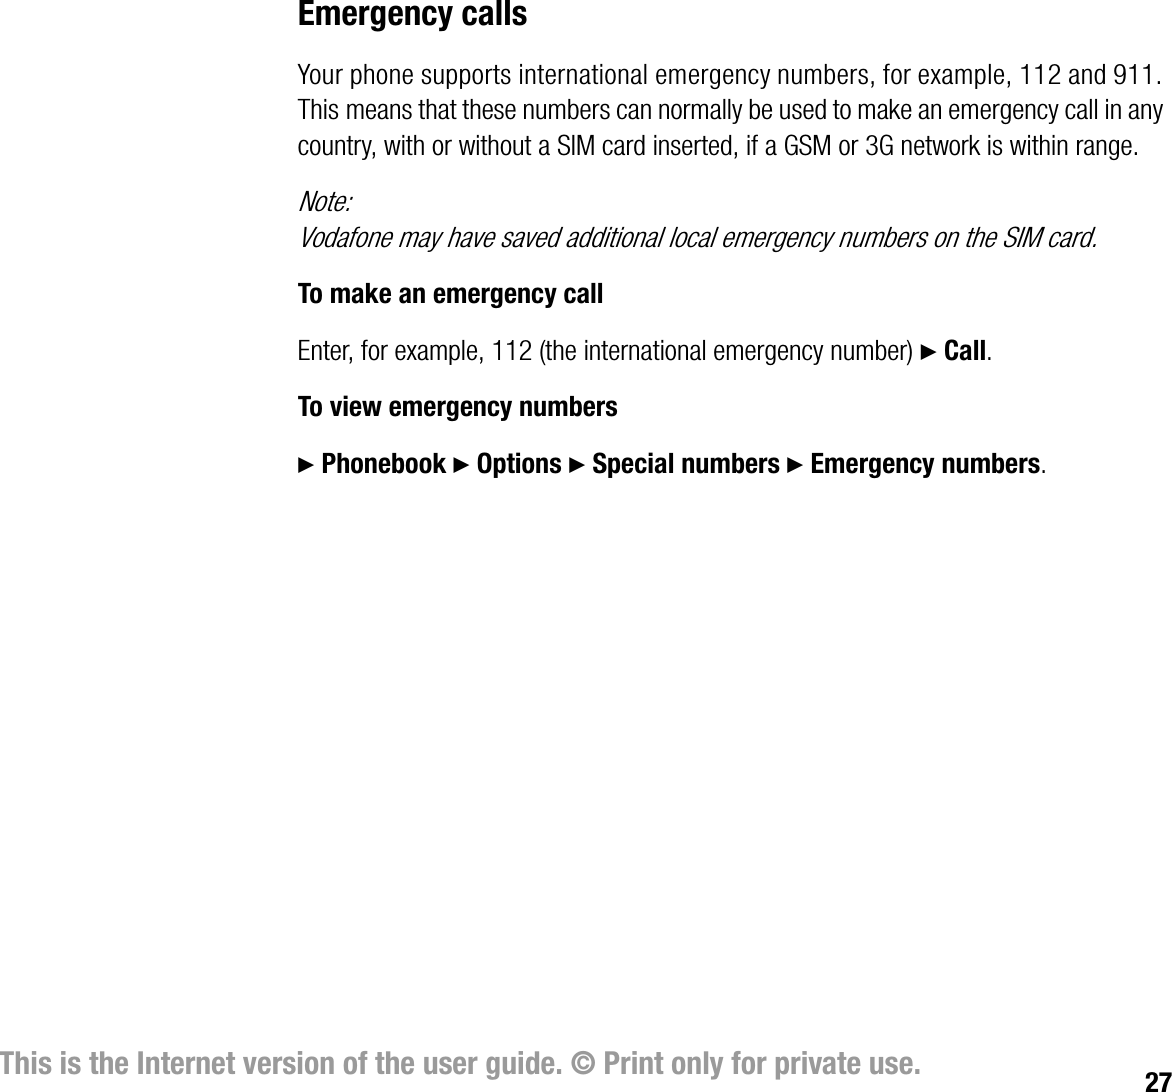 27This is the Internet version of the user guide. © Print only for private use.Emergency callsYour phone supports international emergency numbers, for example, 112 and 911. This means that these numbers can normally be used to make an emergency call in any country, with or without a SIM card inserted, if a GSM or 3G network is within range.Note:Vodafone may have saved additional local emergency numbers on the SIM card.To make an emergency callEnter, for example, 112 (the international emergency number) } Call.To view emergency numbers} Phonebook } Options } Special numbers } Emergency numbers.